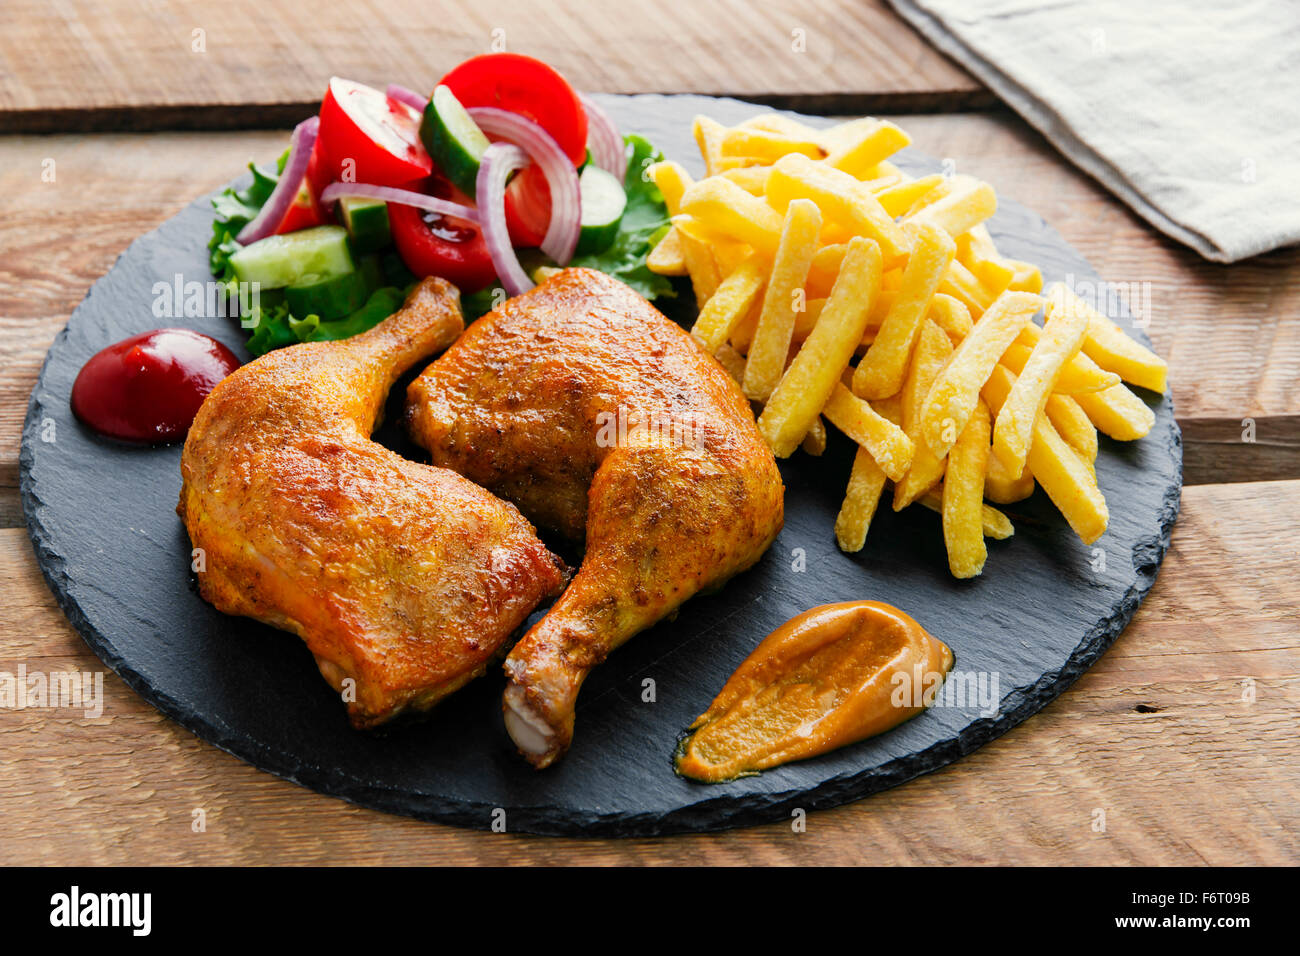 roasted chicken legs with french fries and salad Stock Photo